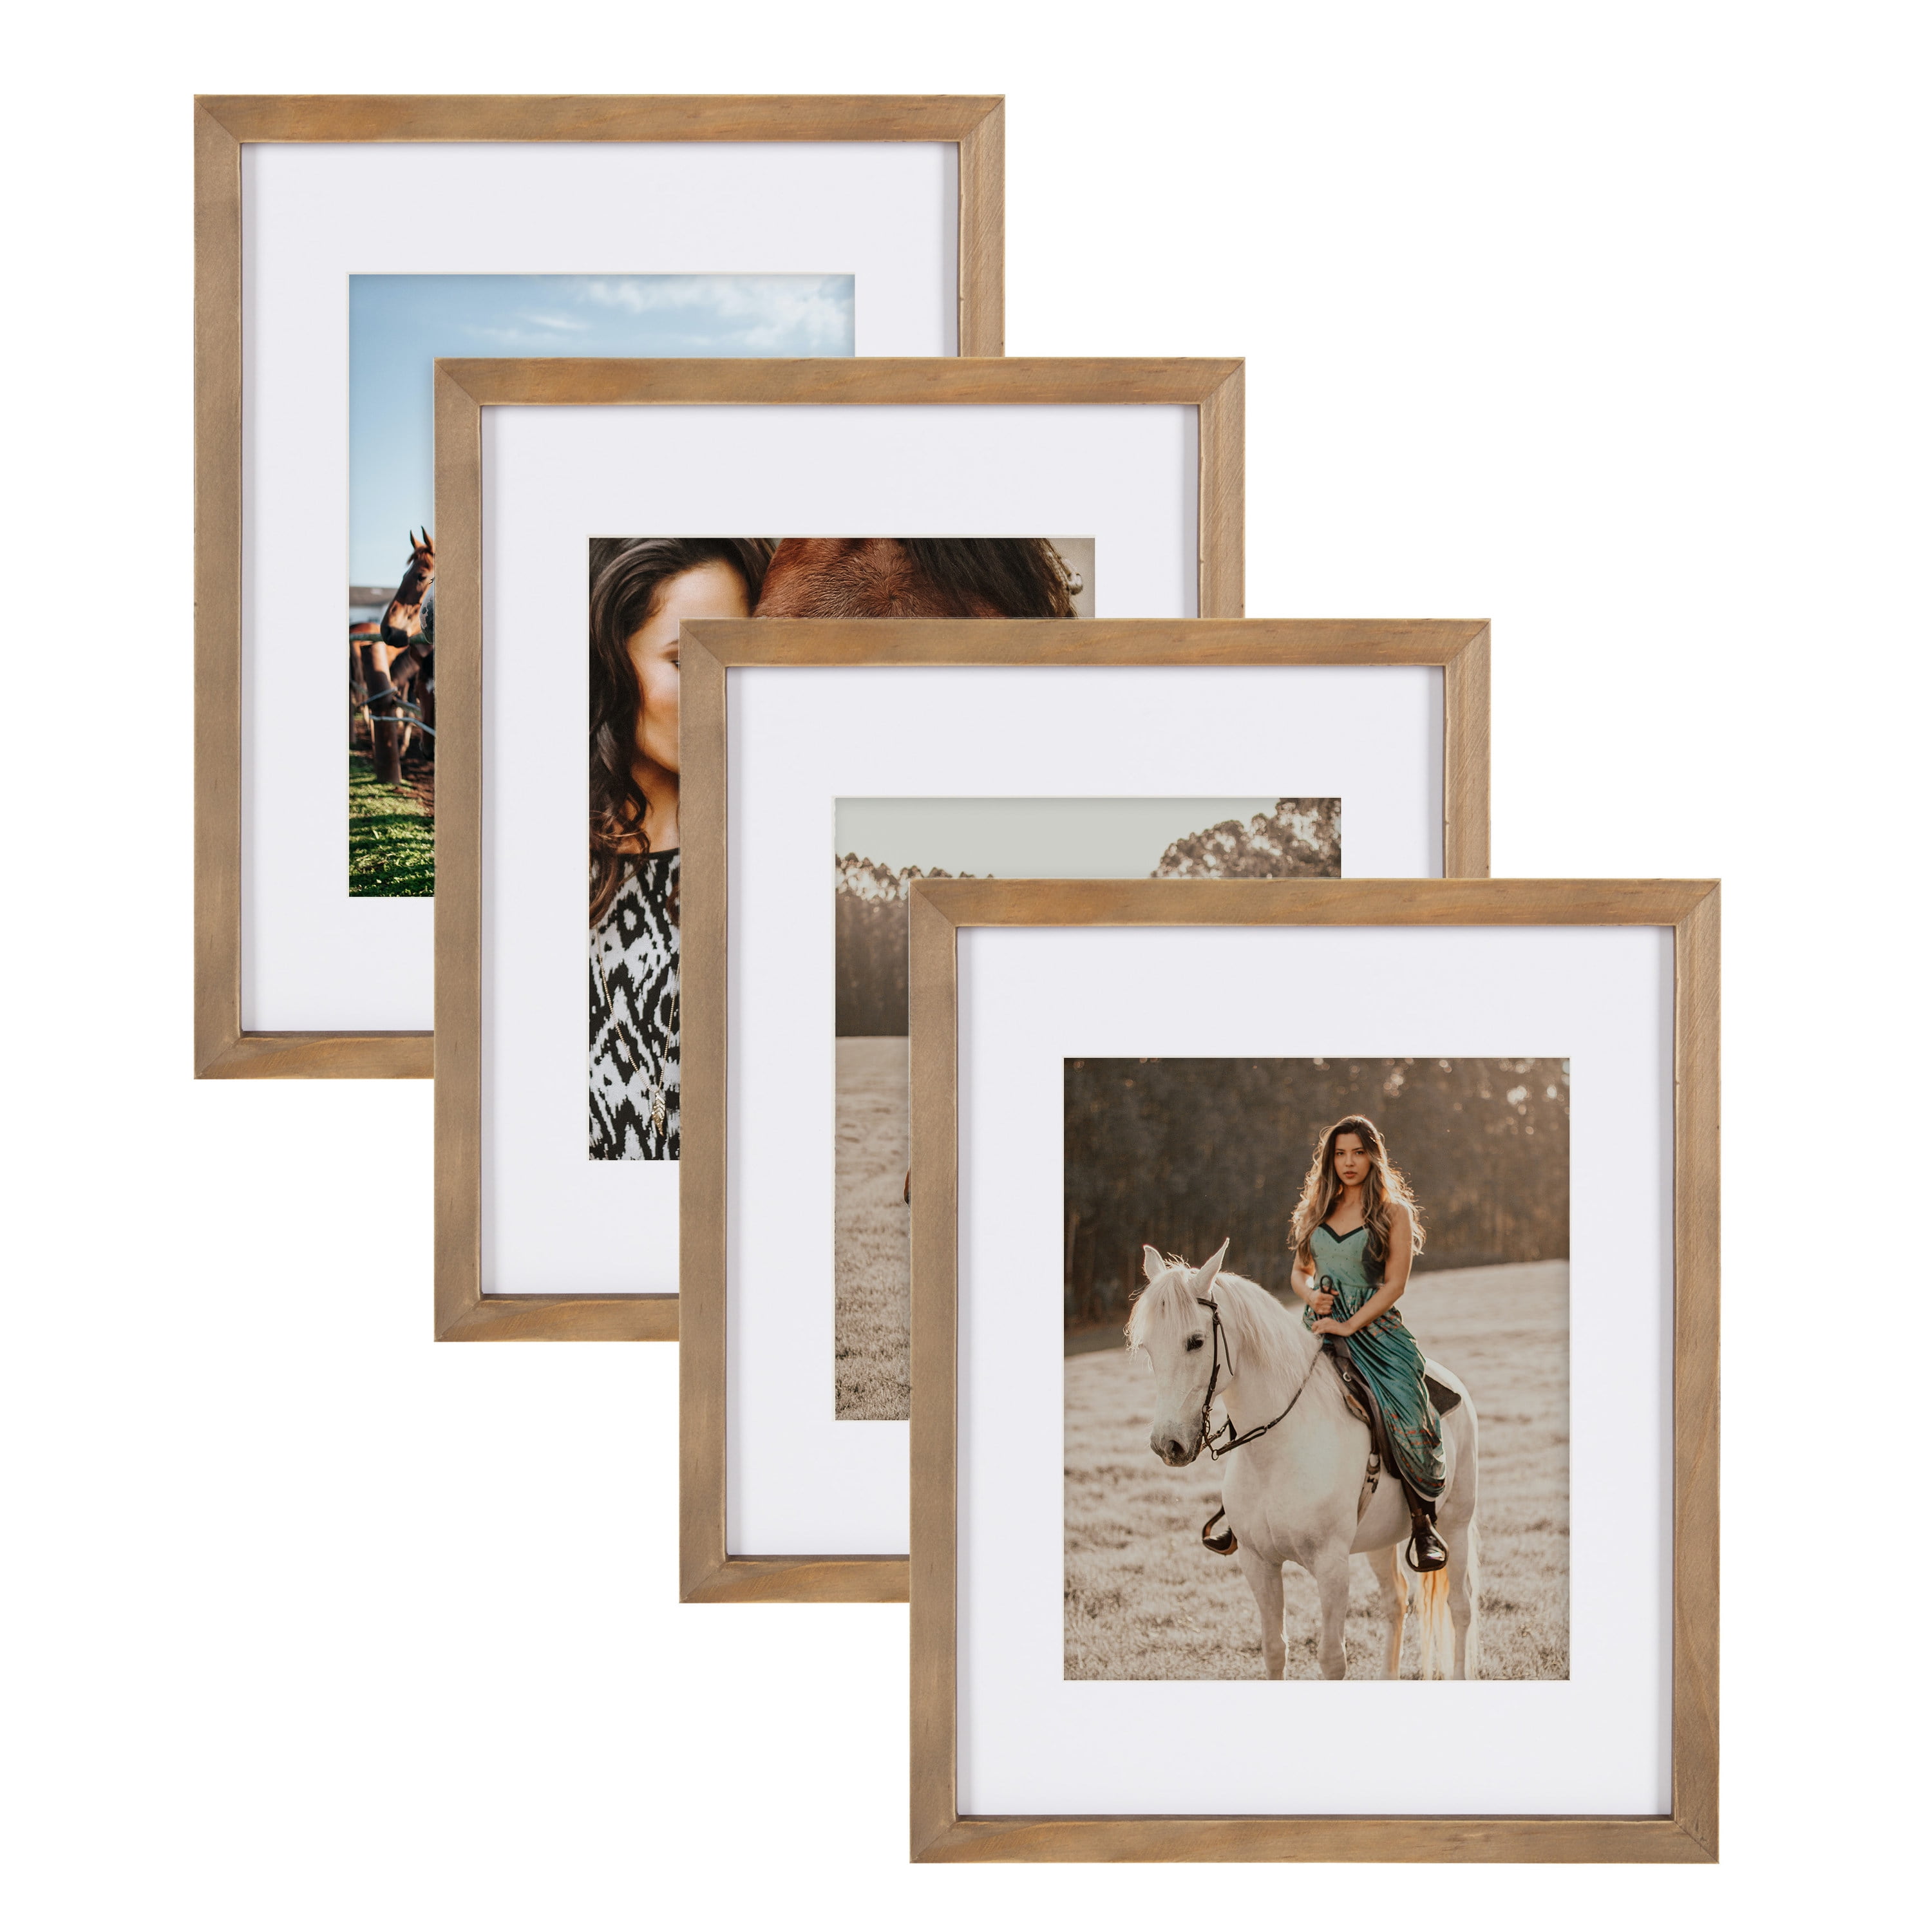  TWING 8x10 Picture Frames Set of 6, Rustic Photo Frames  Collage for Wall Decor Mounting or Table Display,Home Decorative Wall  Gallery Picture Photo Frame Wood Brown,Walnut